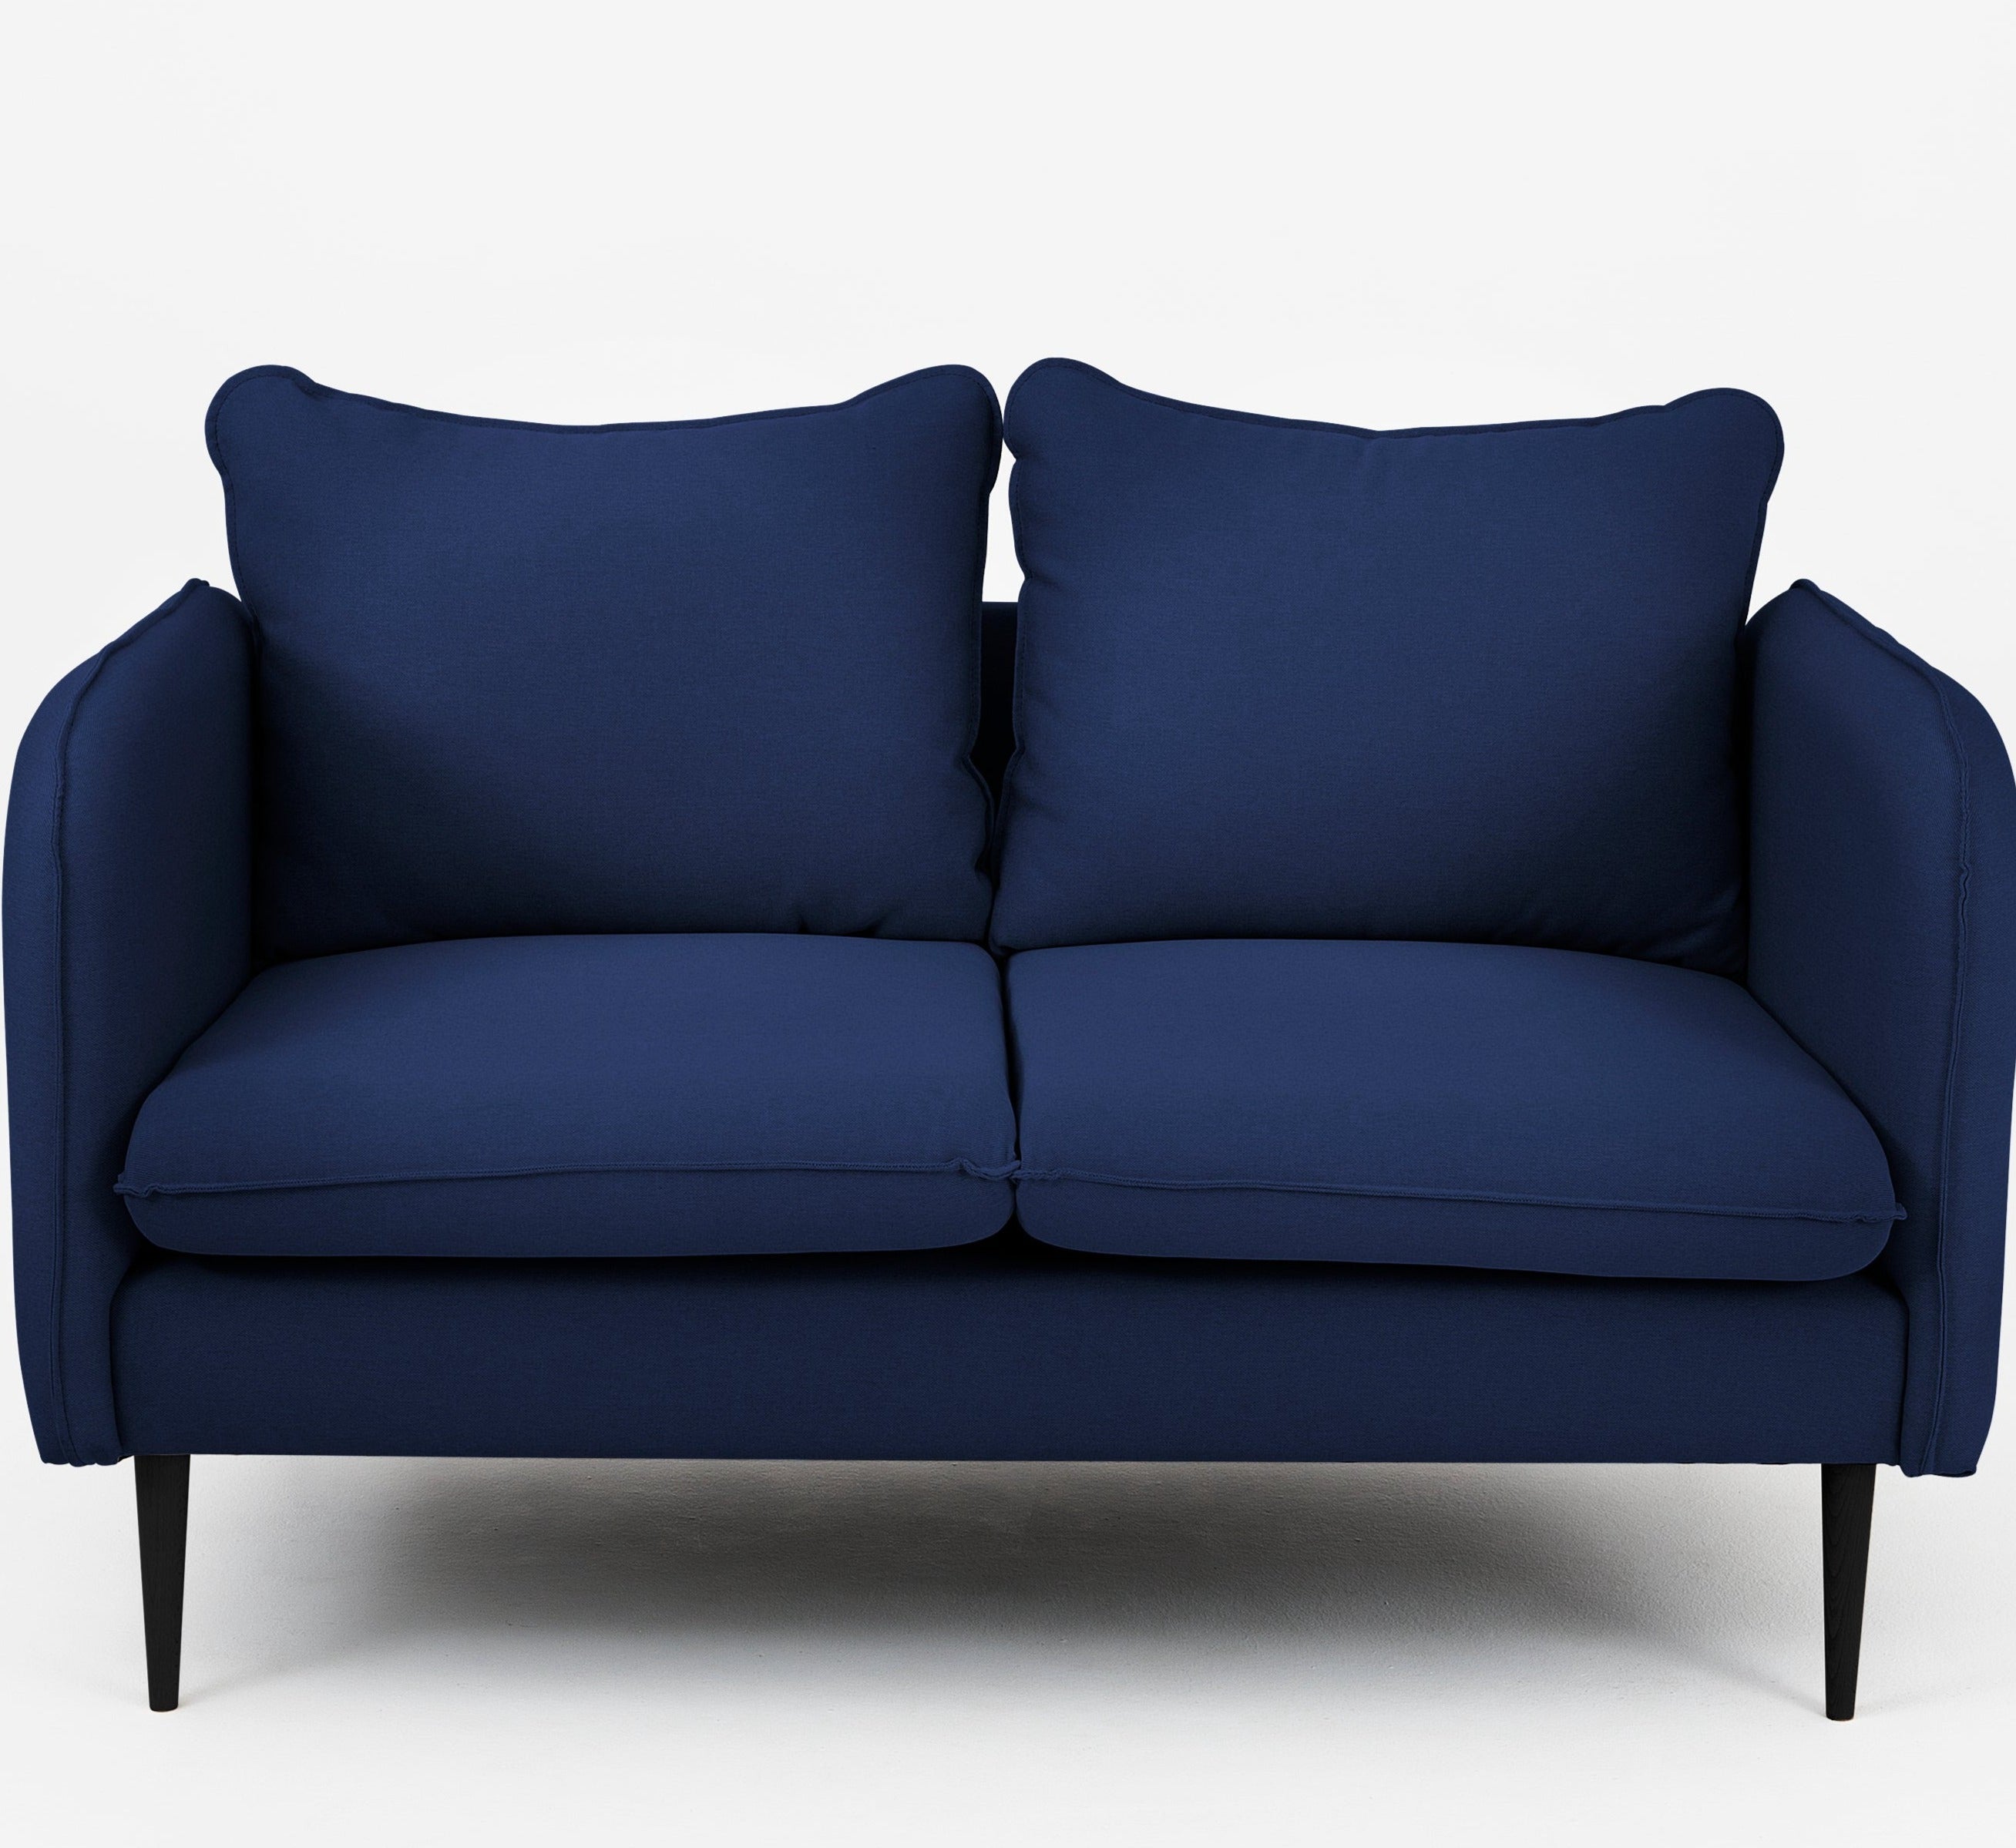 POSH BLACK Sofa 2 Seaters upholstery colour blue-front view